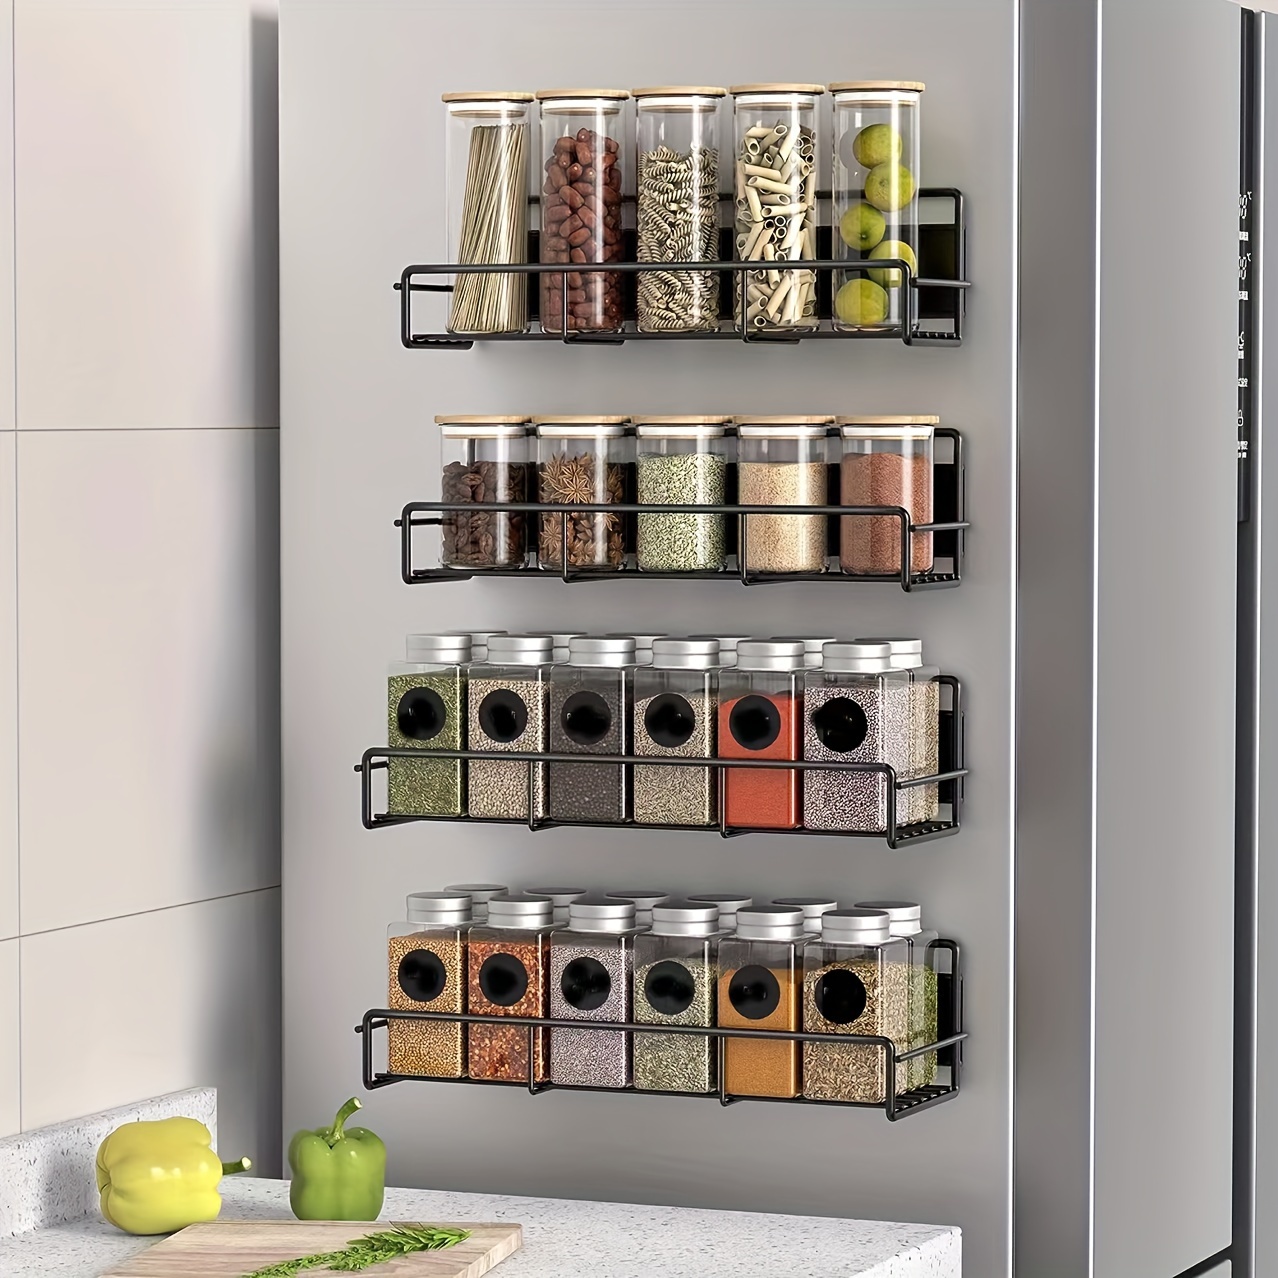 

1pc Floating Magnetic Kitchen Spice Storage Racks, Durable Magnetic Storage Holders, Household Storage Organization For Refrigerator, Bathroom, Bedroom, Entryway, Home, Kitchen Accessories